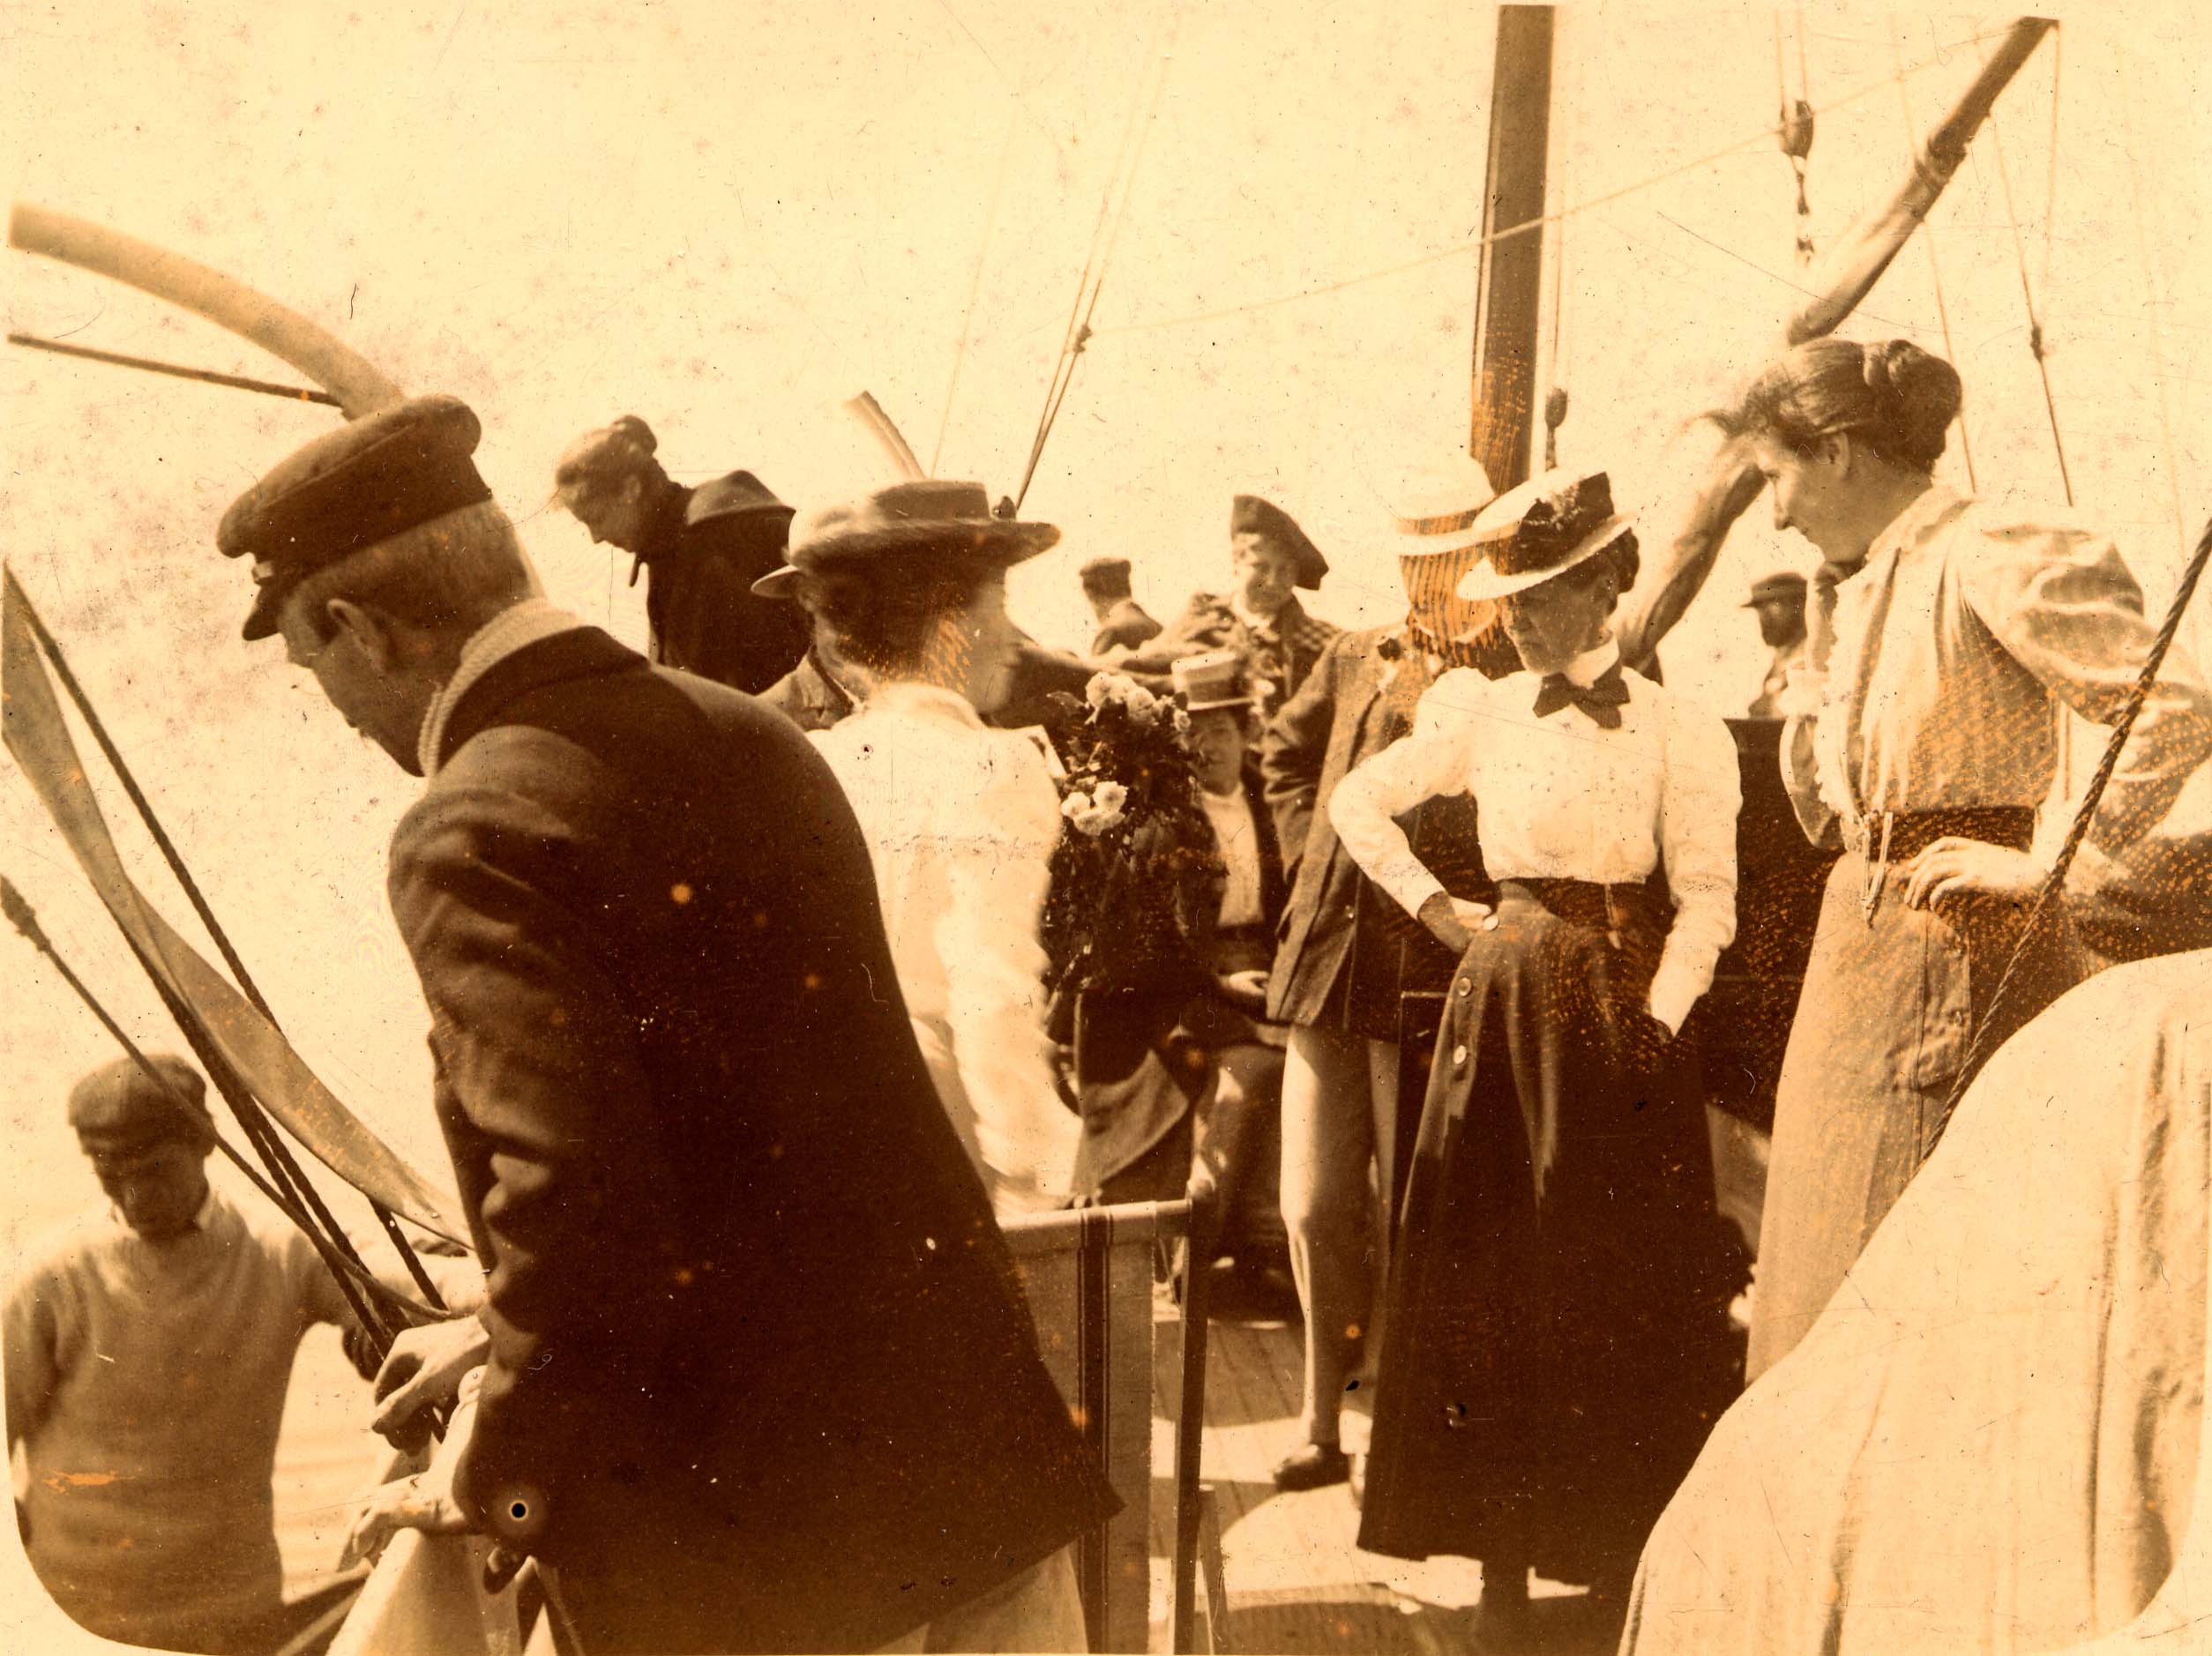 Mary Spence Watson on board the Curlew, August 1899